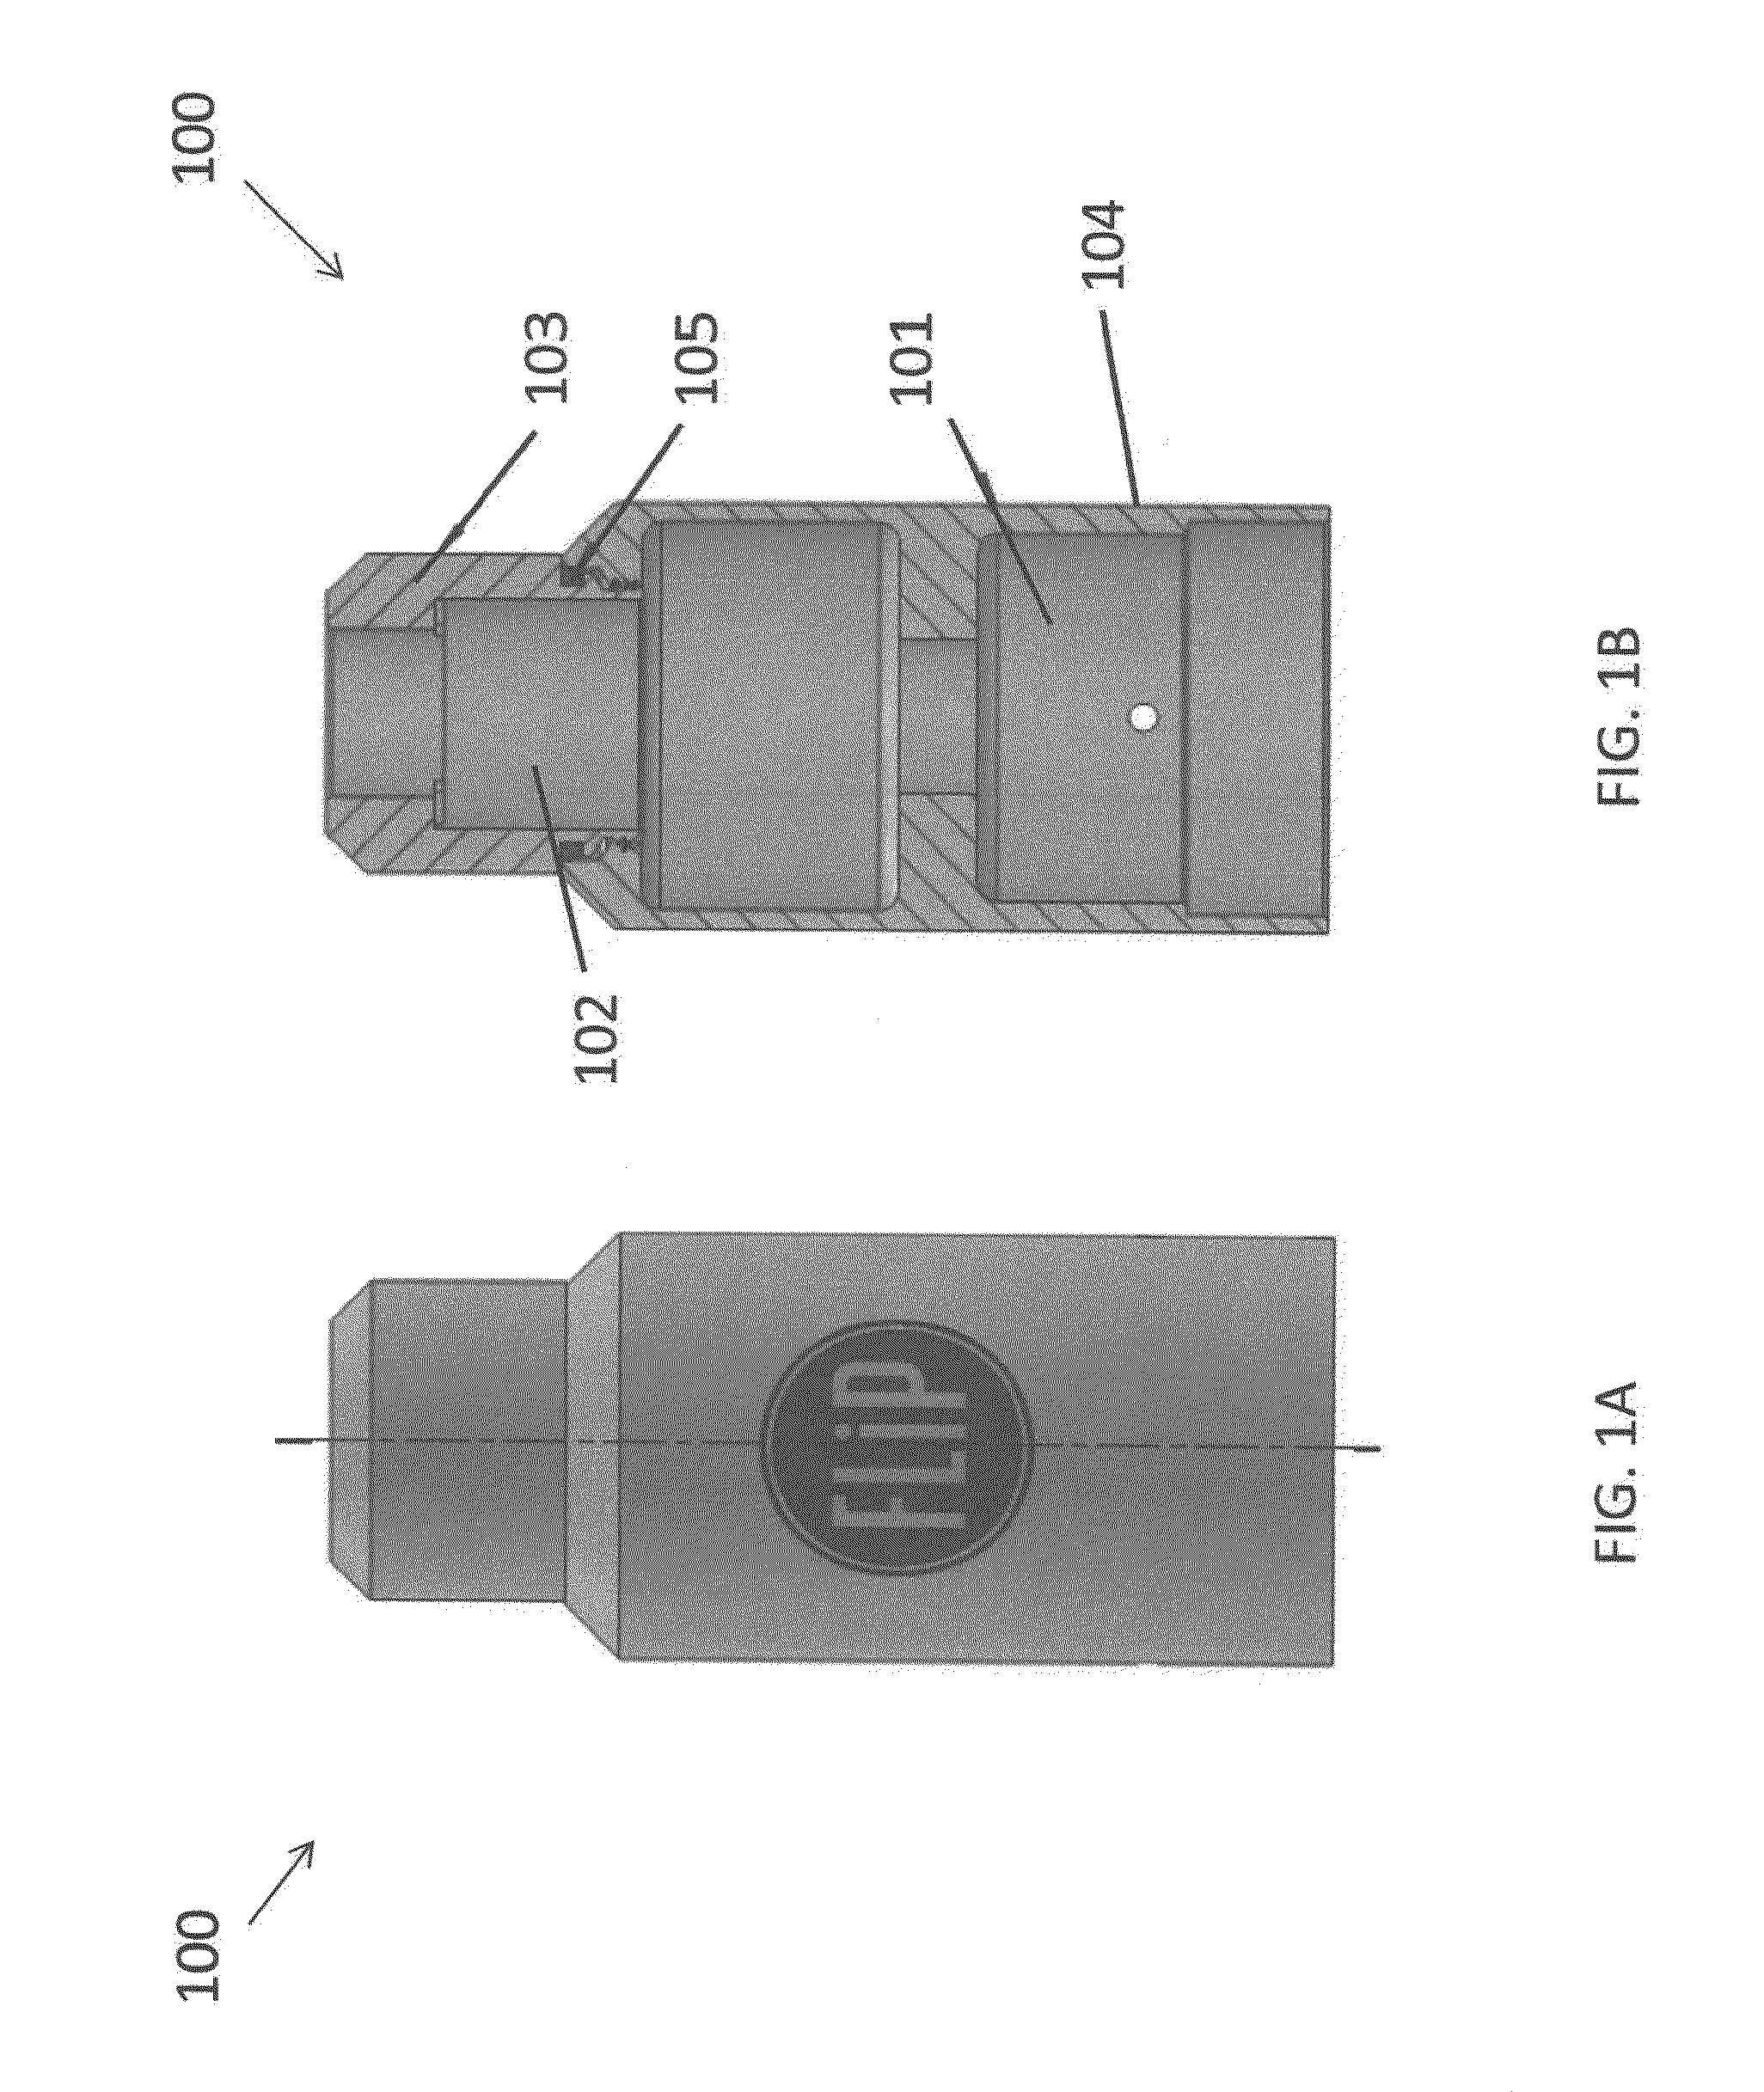 Enhanced Electronic Cigarette Assembly With Modular Disposable Elements Including Tanks